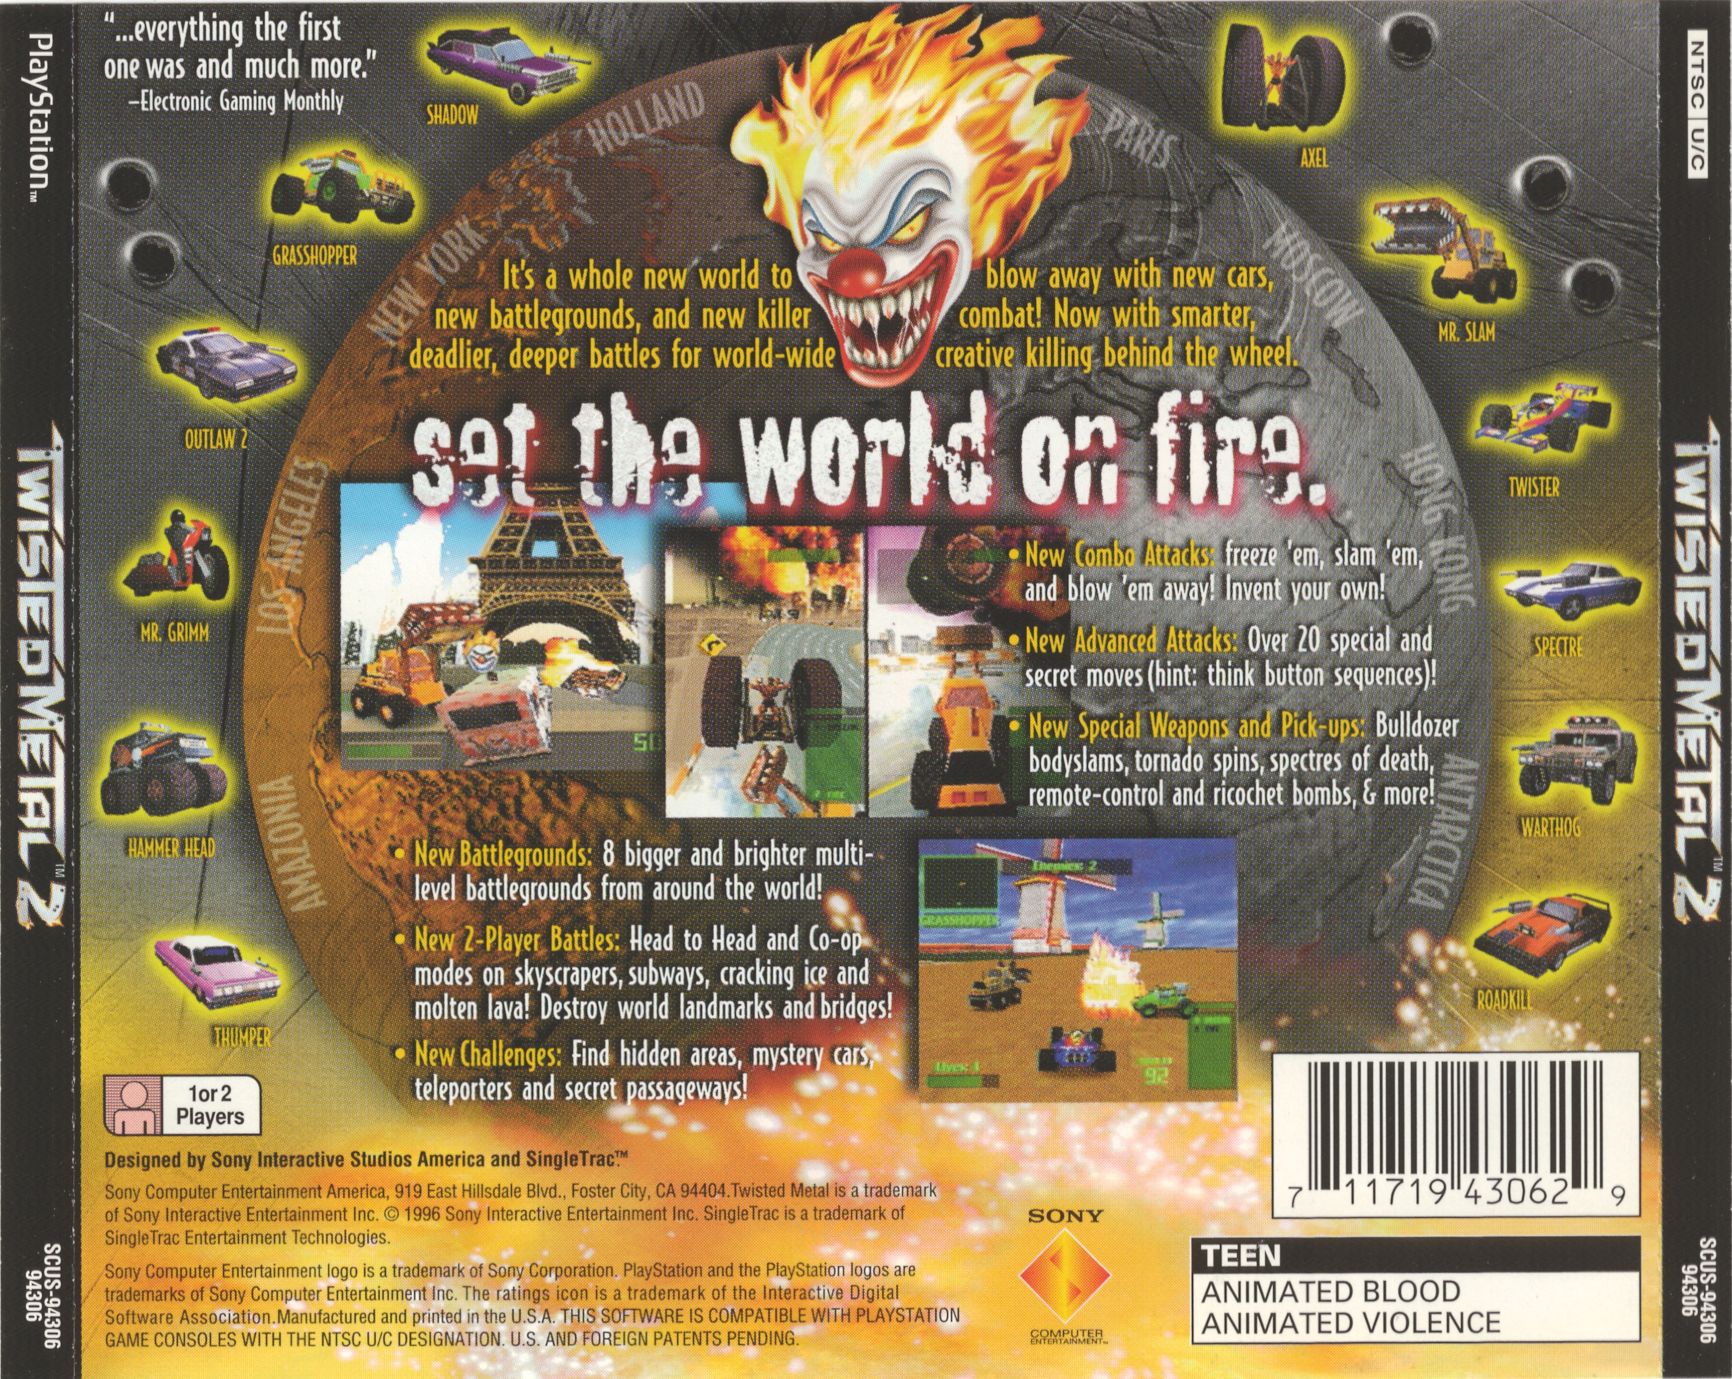 download twisted metal 2 psx